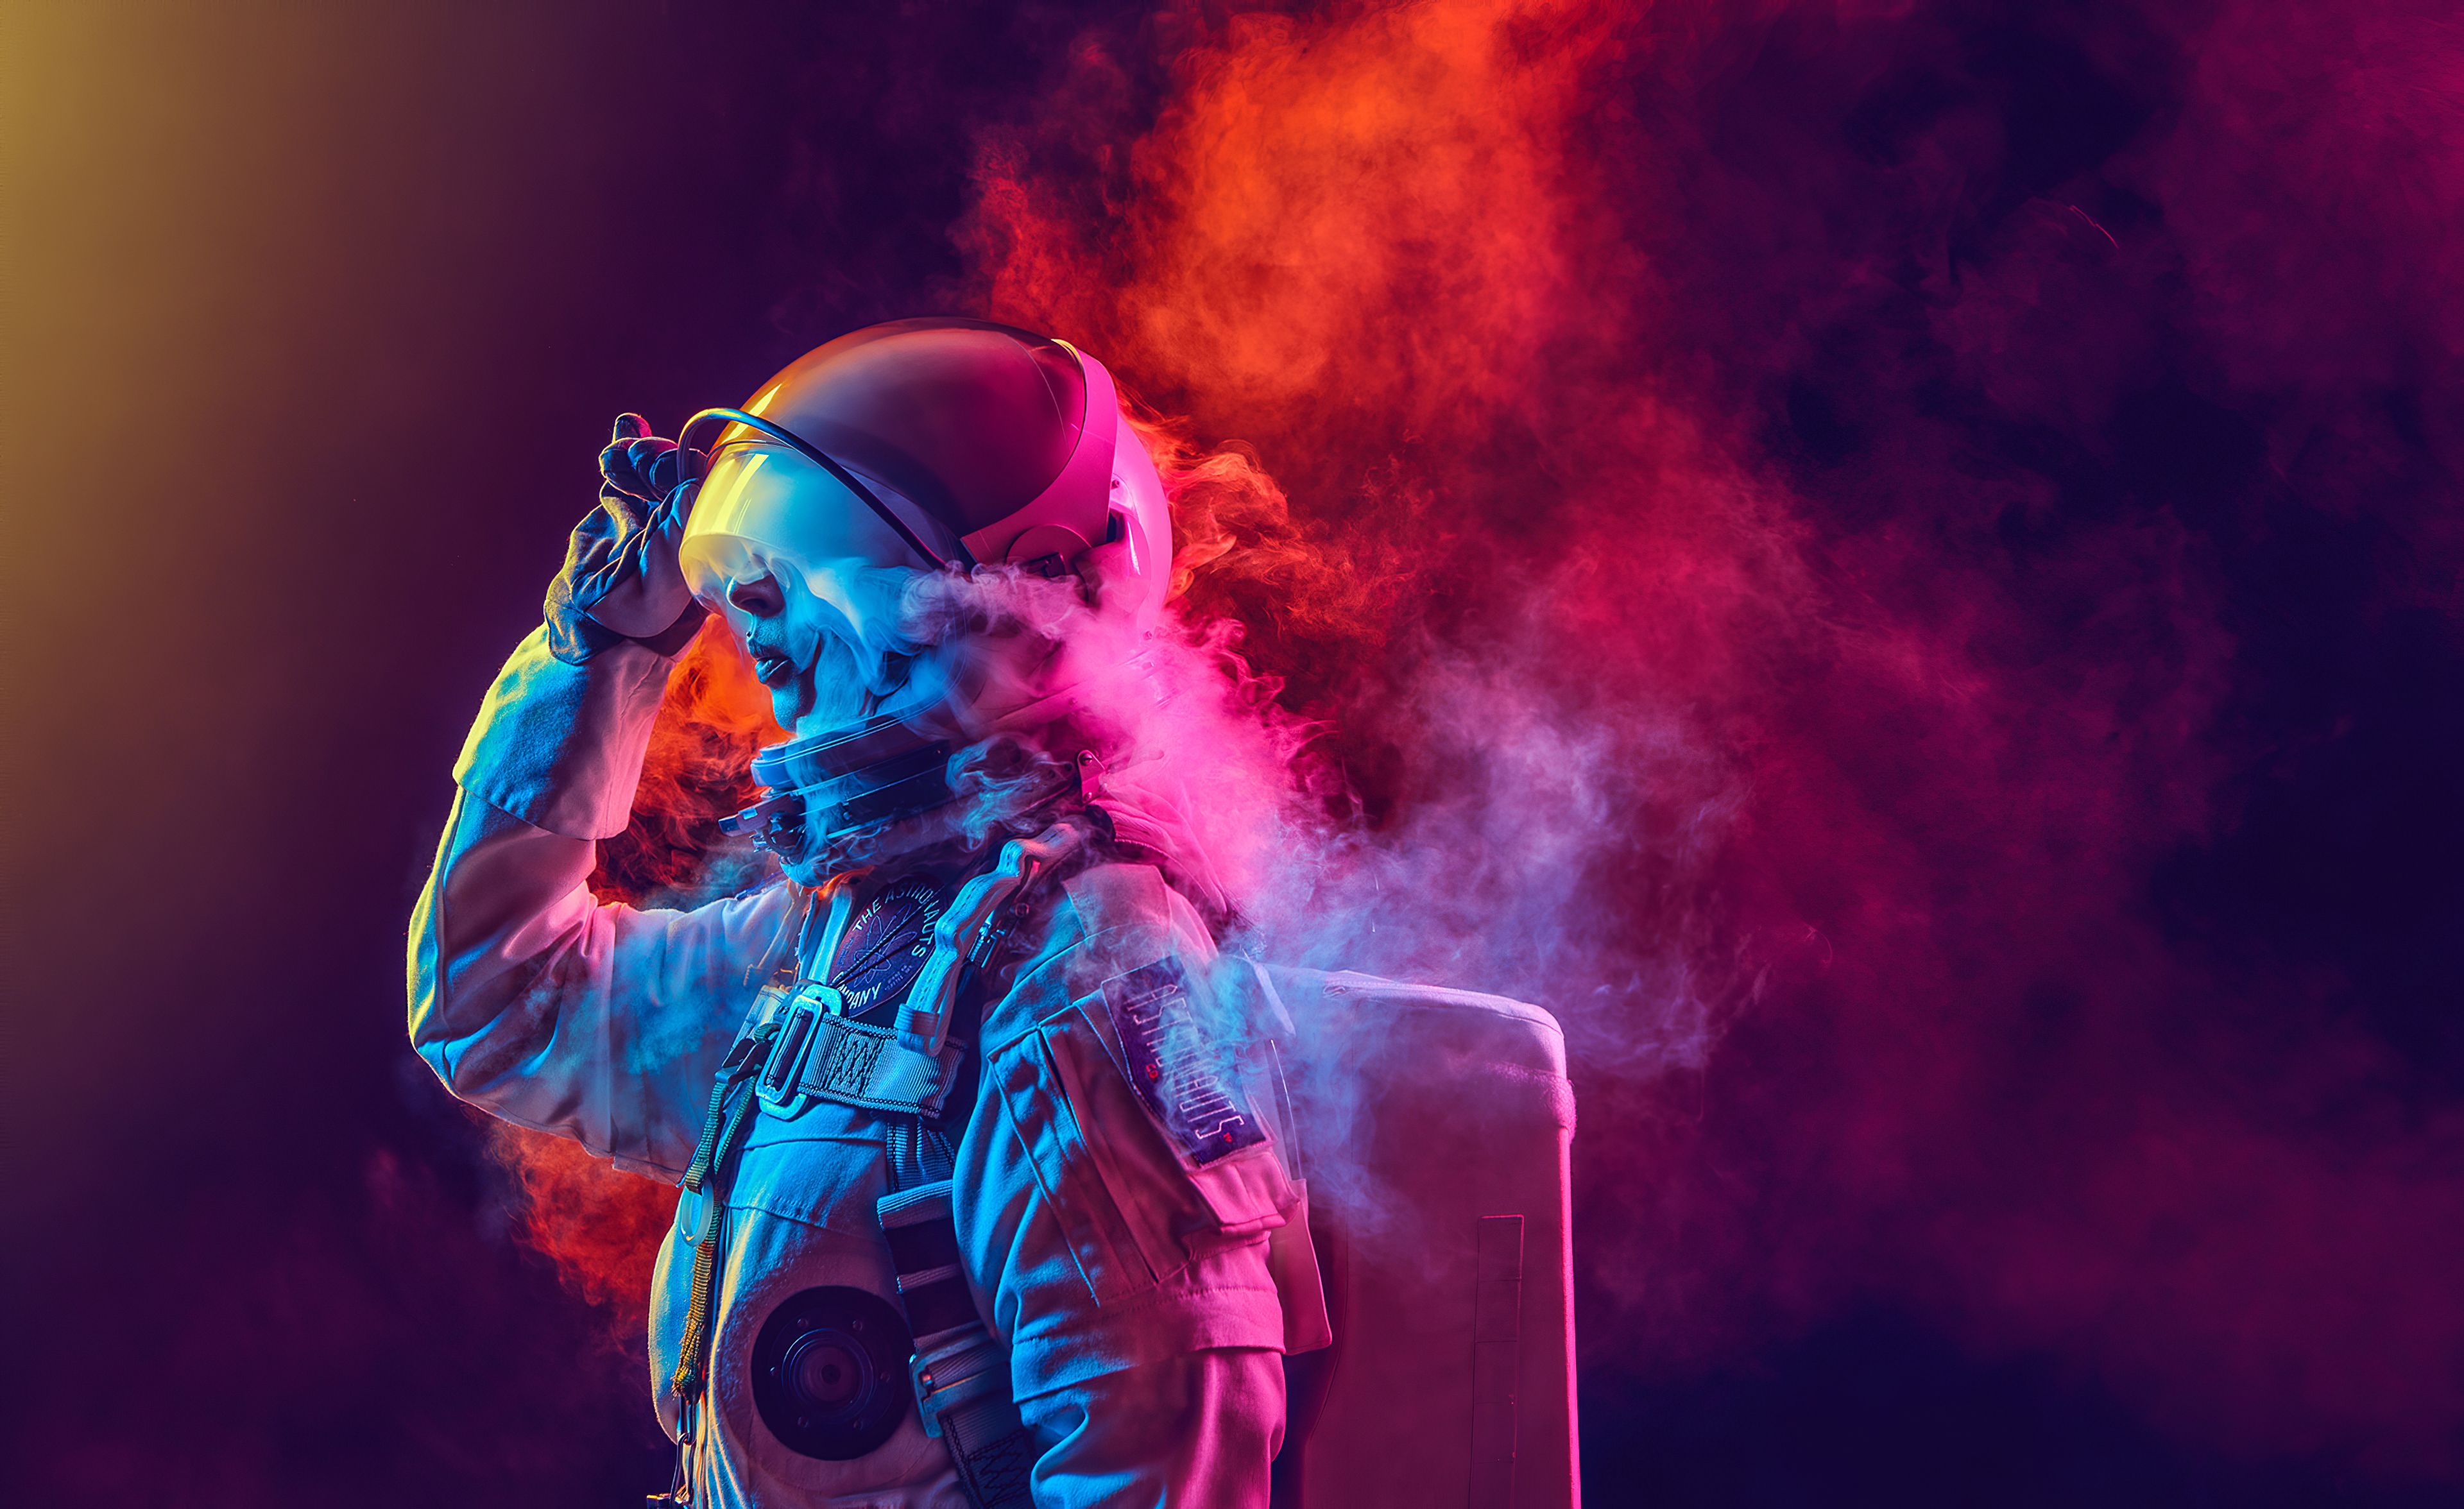 Astronaut Coloured Smoke 4k, HD Artist, 4k Wallpaper, Image, Background, Photo and Picture